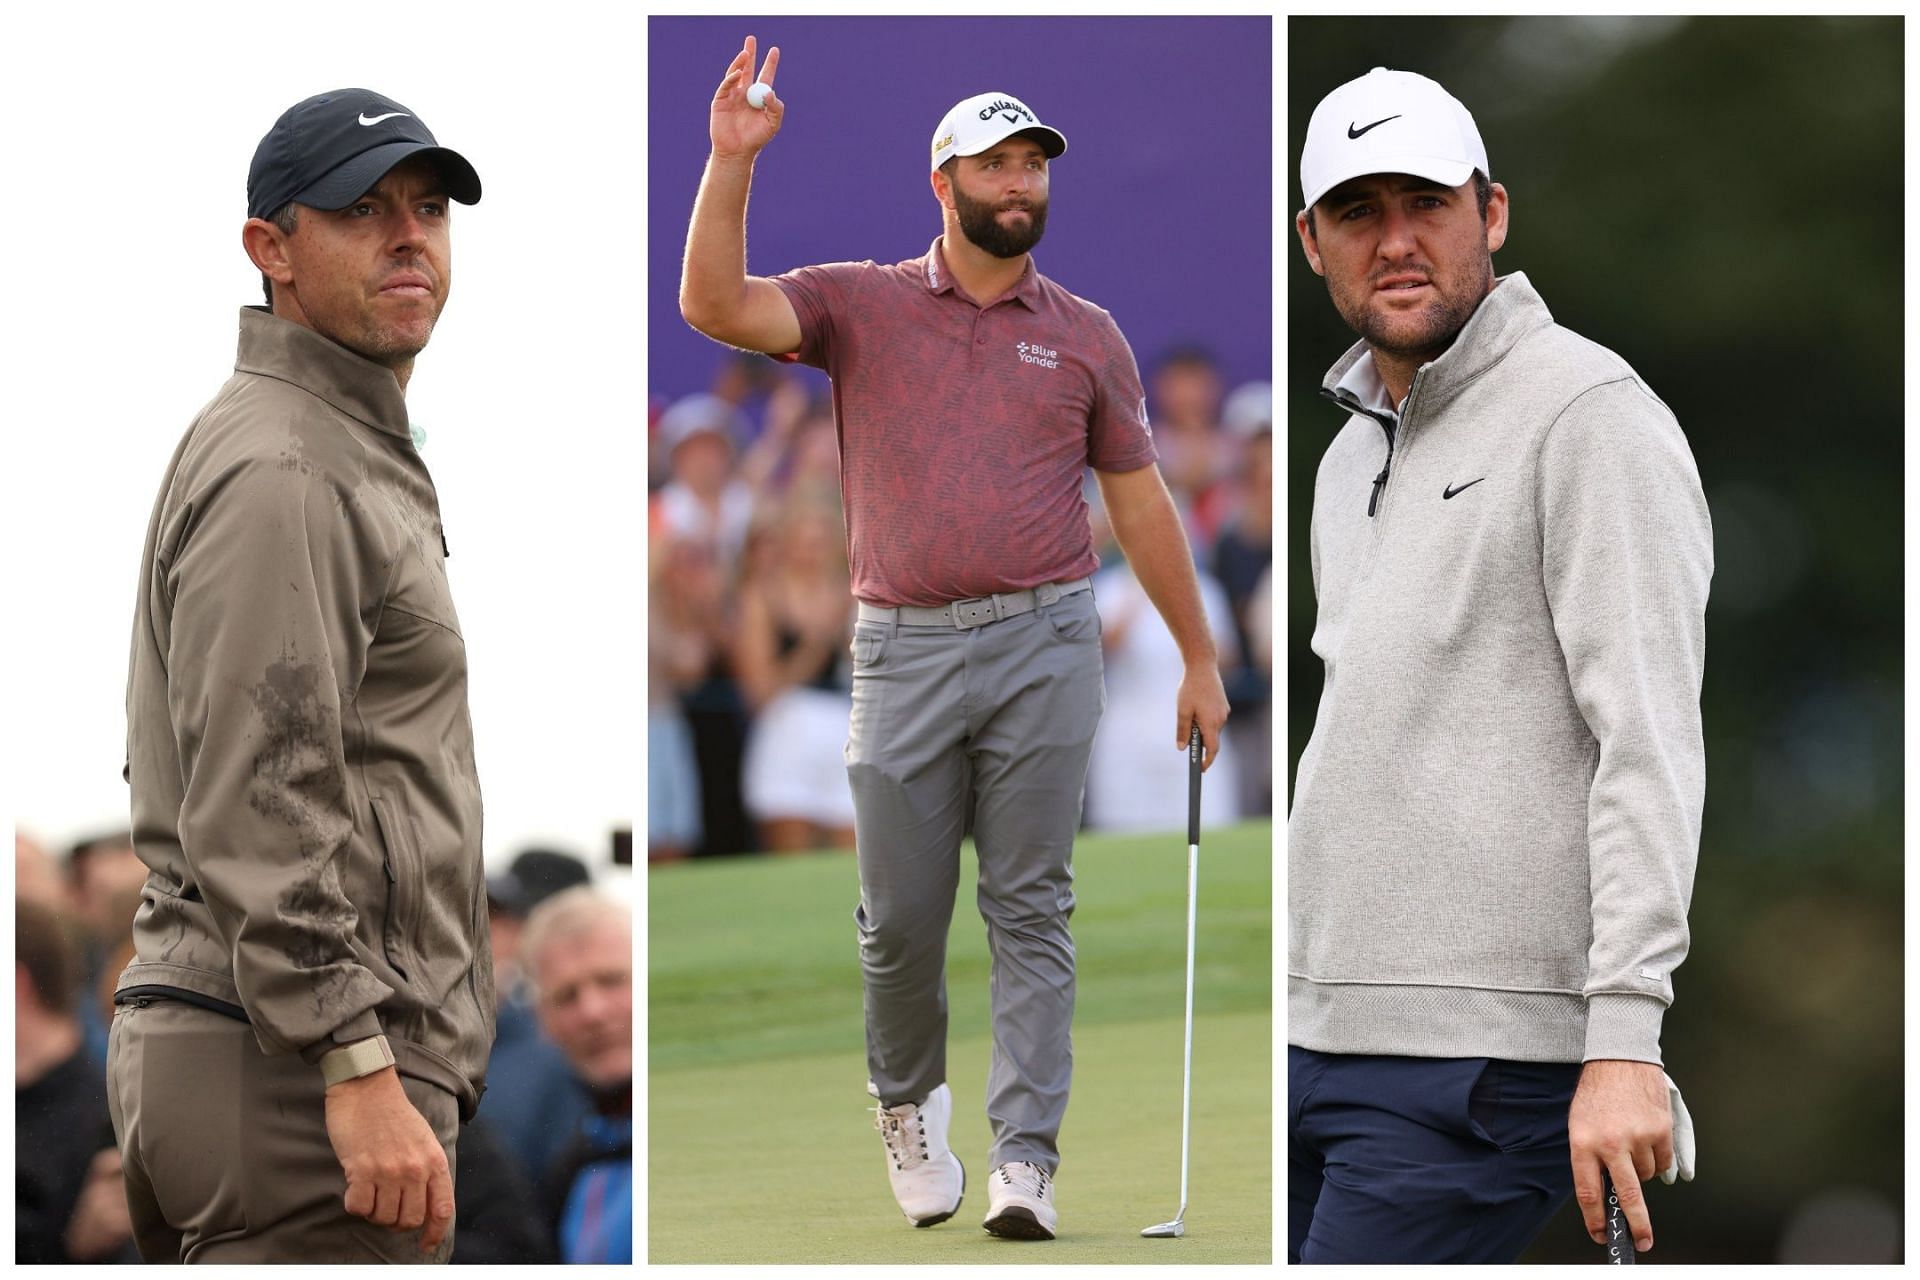 Rory McIlroy, Jon Rahm and Scottie Scheffler are skipping the Wyndham Championship ahead of the Playoffs